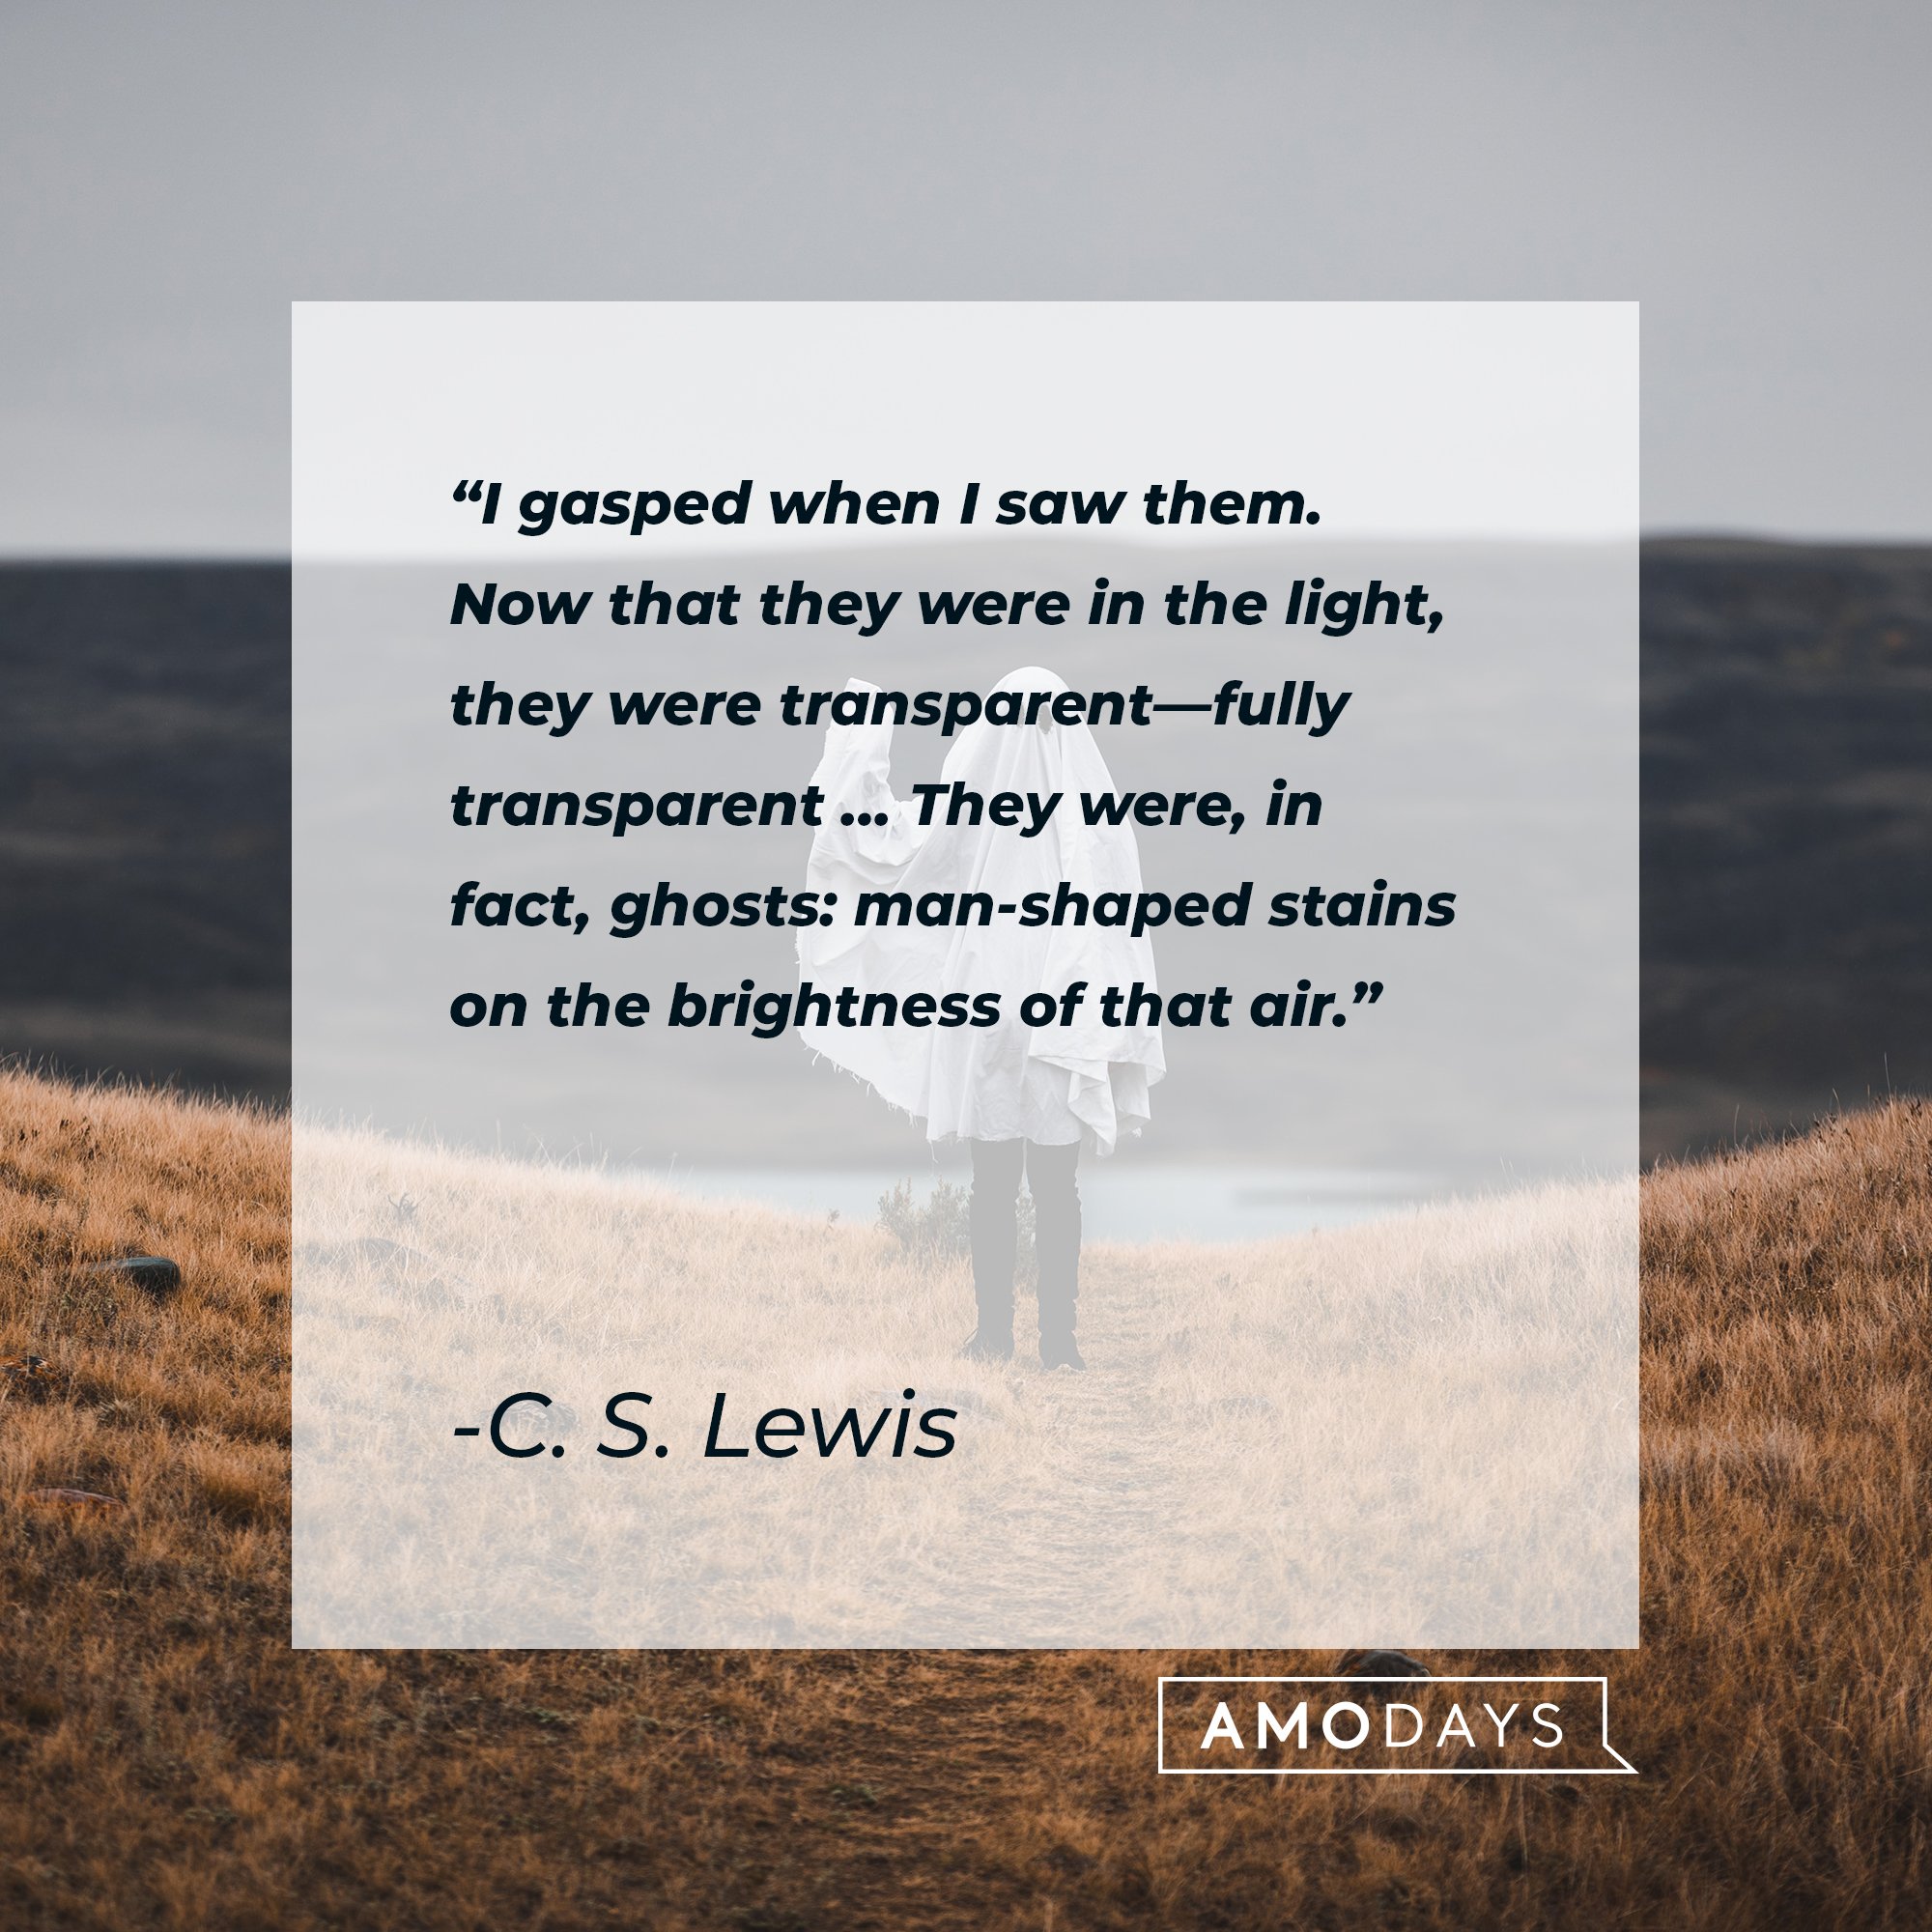 C. S. Lewis’ quote: "I gasped when I saw them. Now that they were in the light, they were transparent―fully transparent … They were, in fact, ghosts: man-shaped stains on the brightness of that air." | Image: AmoDays 